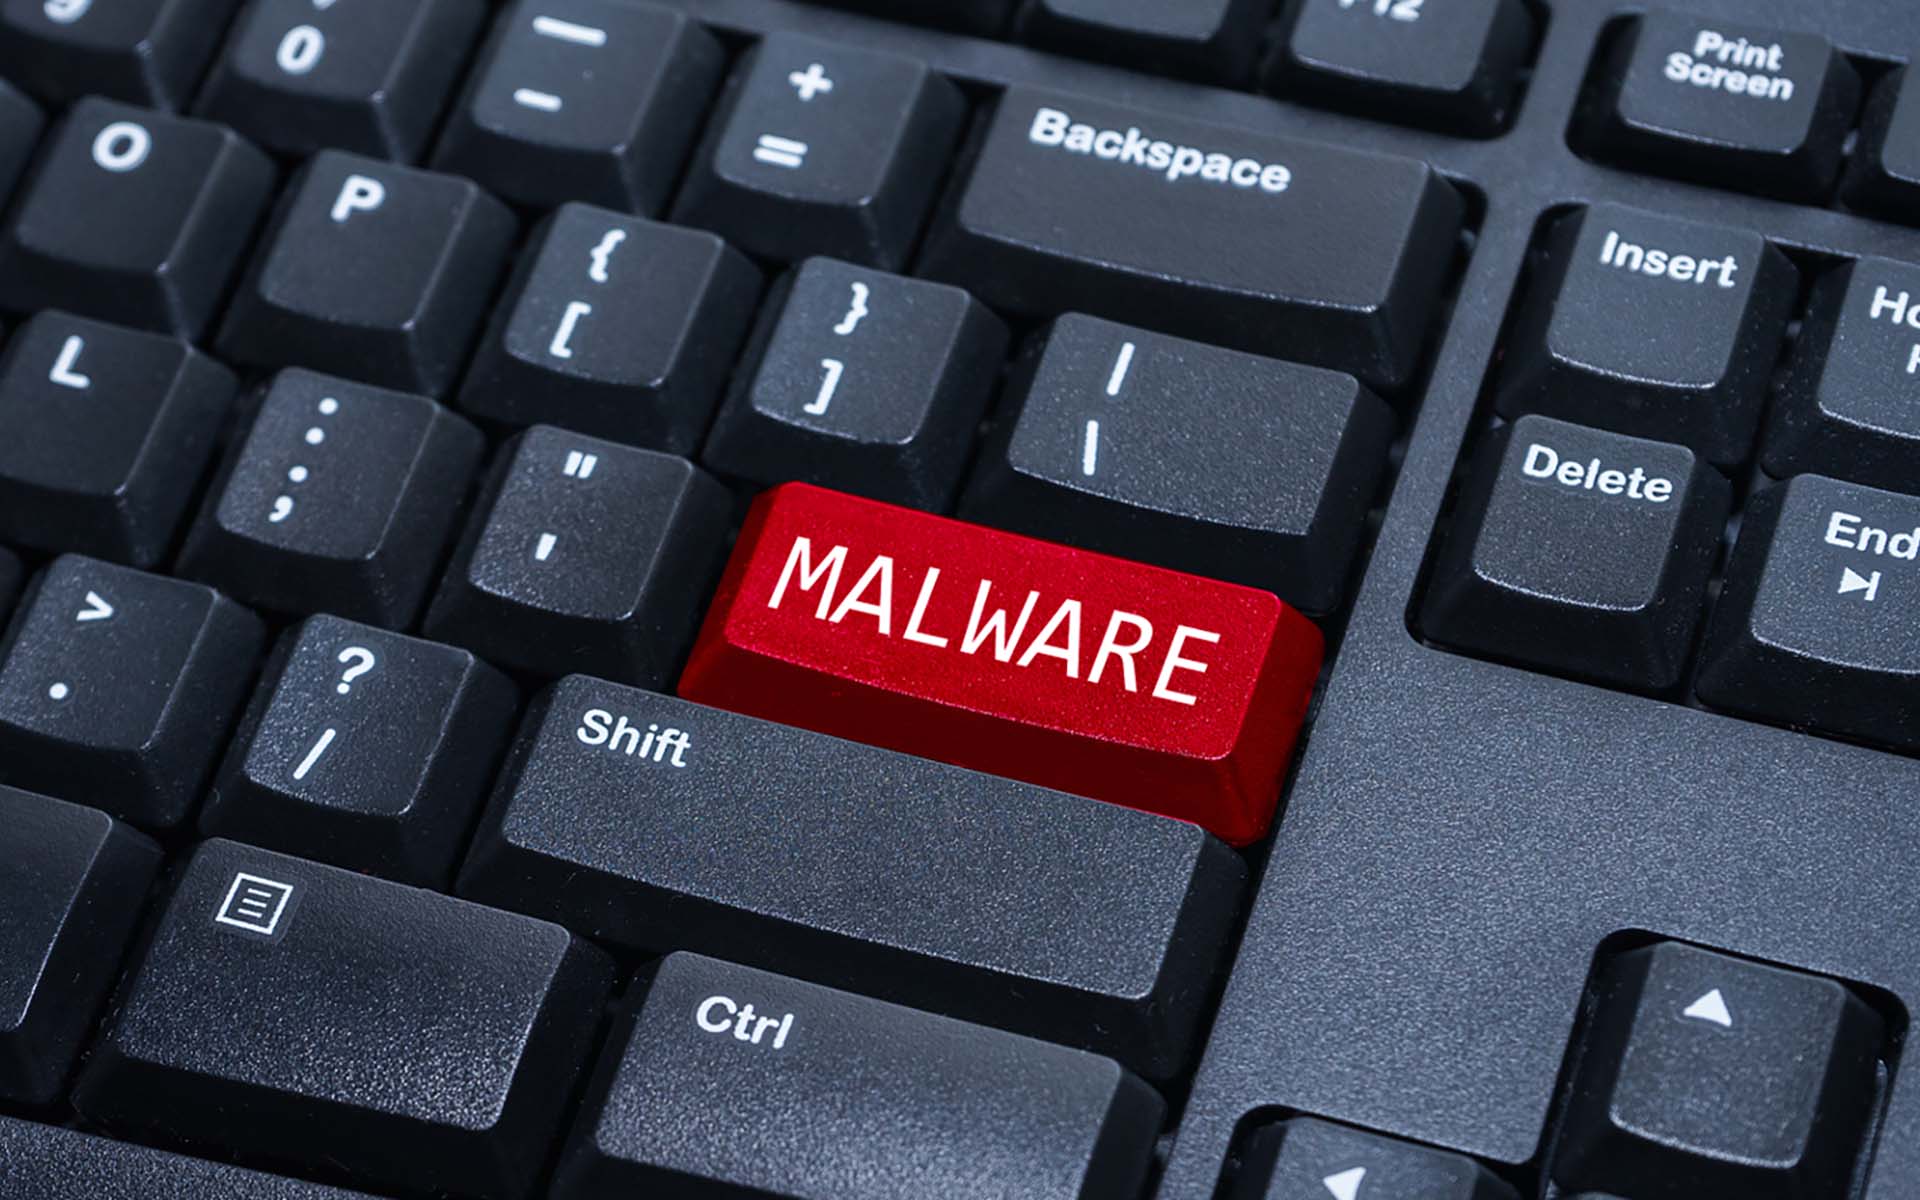 Cryptocurrency Malware ComboJack Targets Clipboard Data - Here's How to Protect Yourself